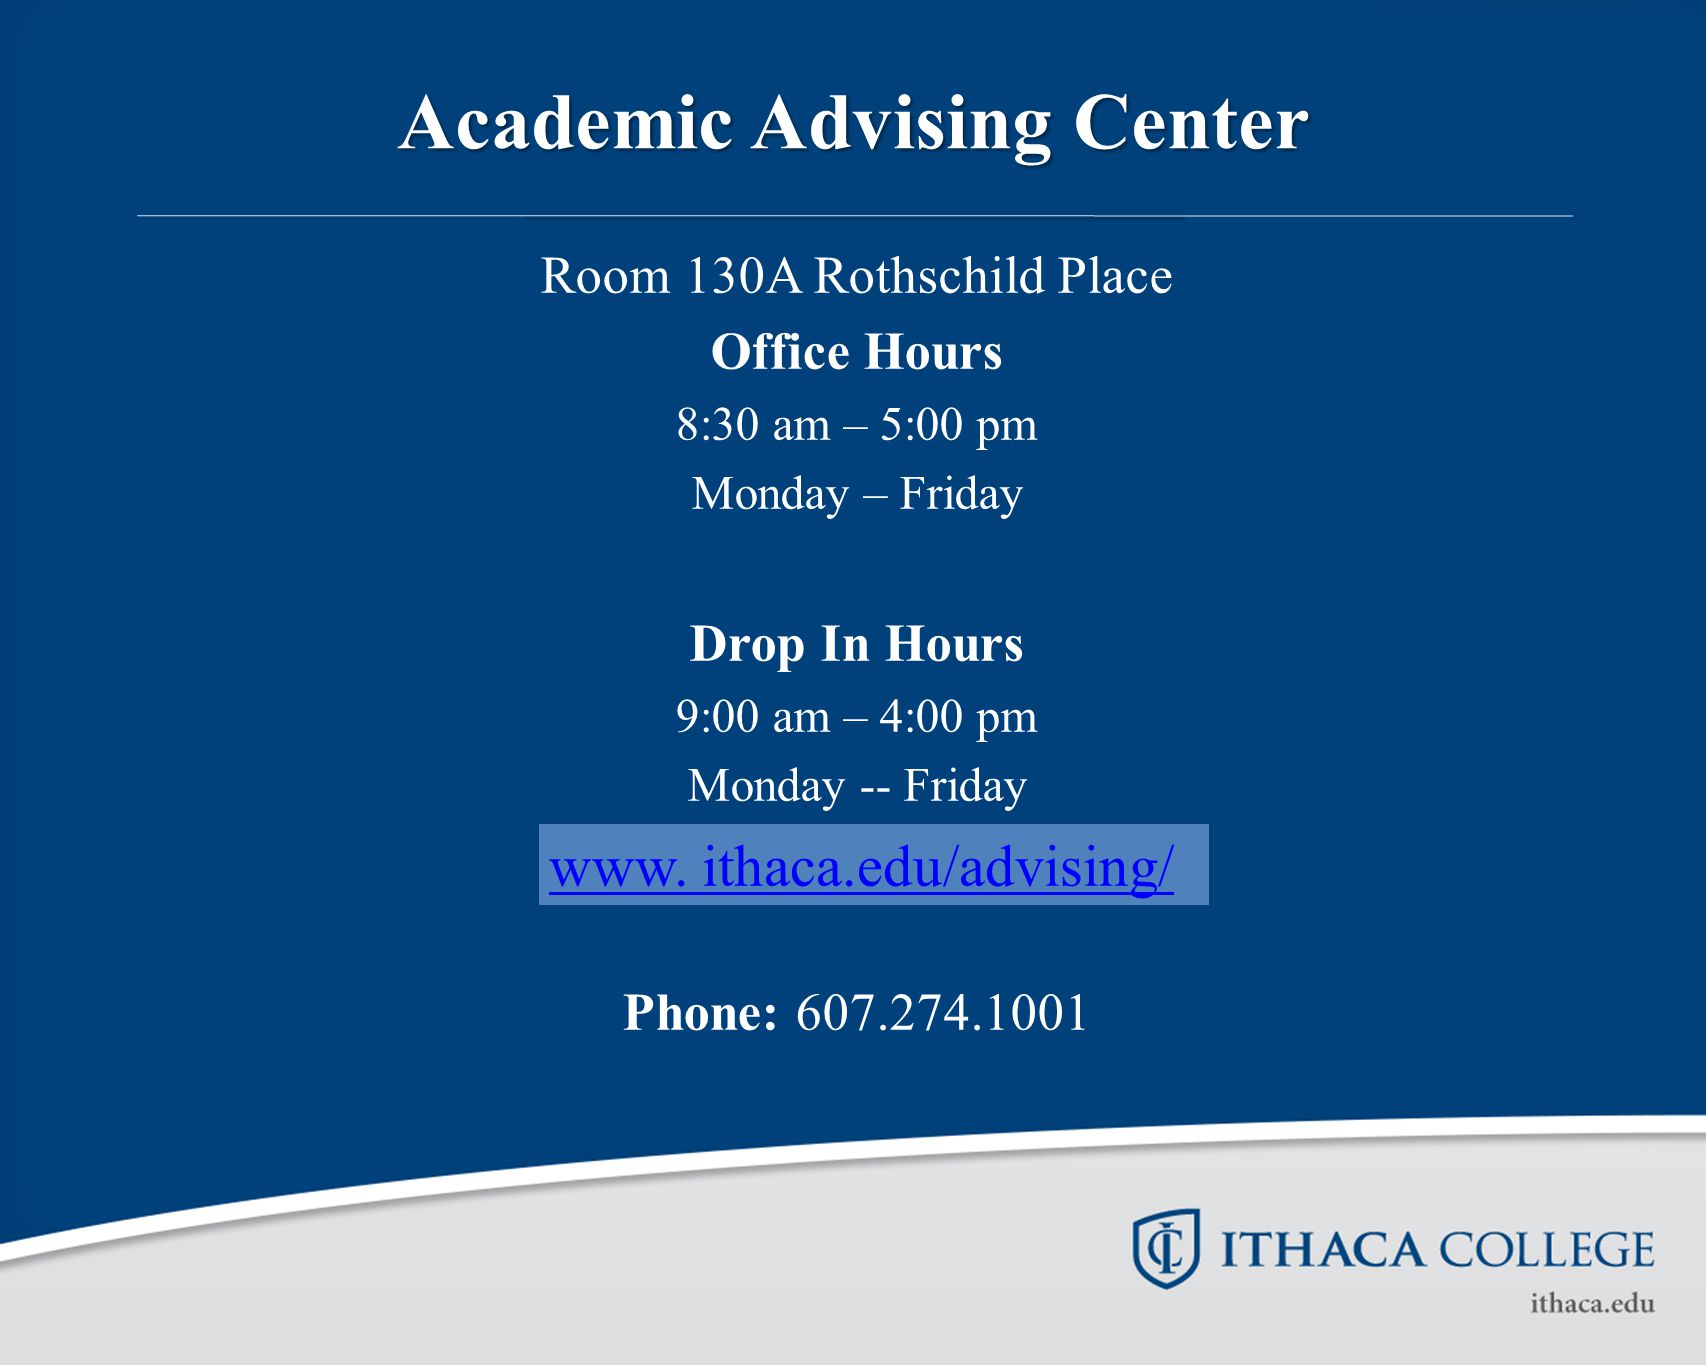 Academic Advising Center Room 130A Rothschild Place Office Hours 8:30 am – 5:00 pm Monday – Friday Drop In Hours 9:00 am – 4:00 pm Monday -- Friday Phone: www.